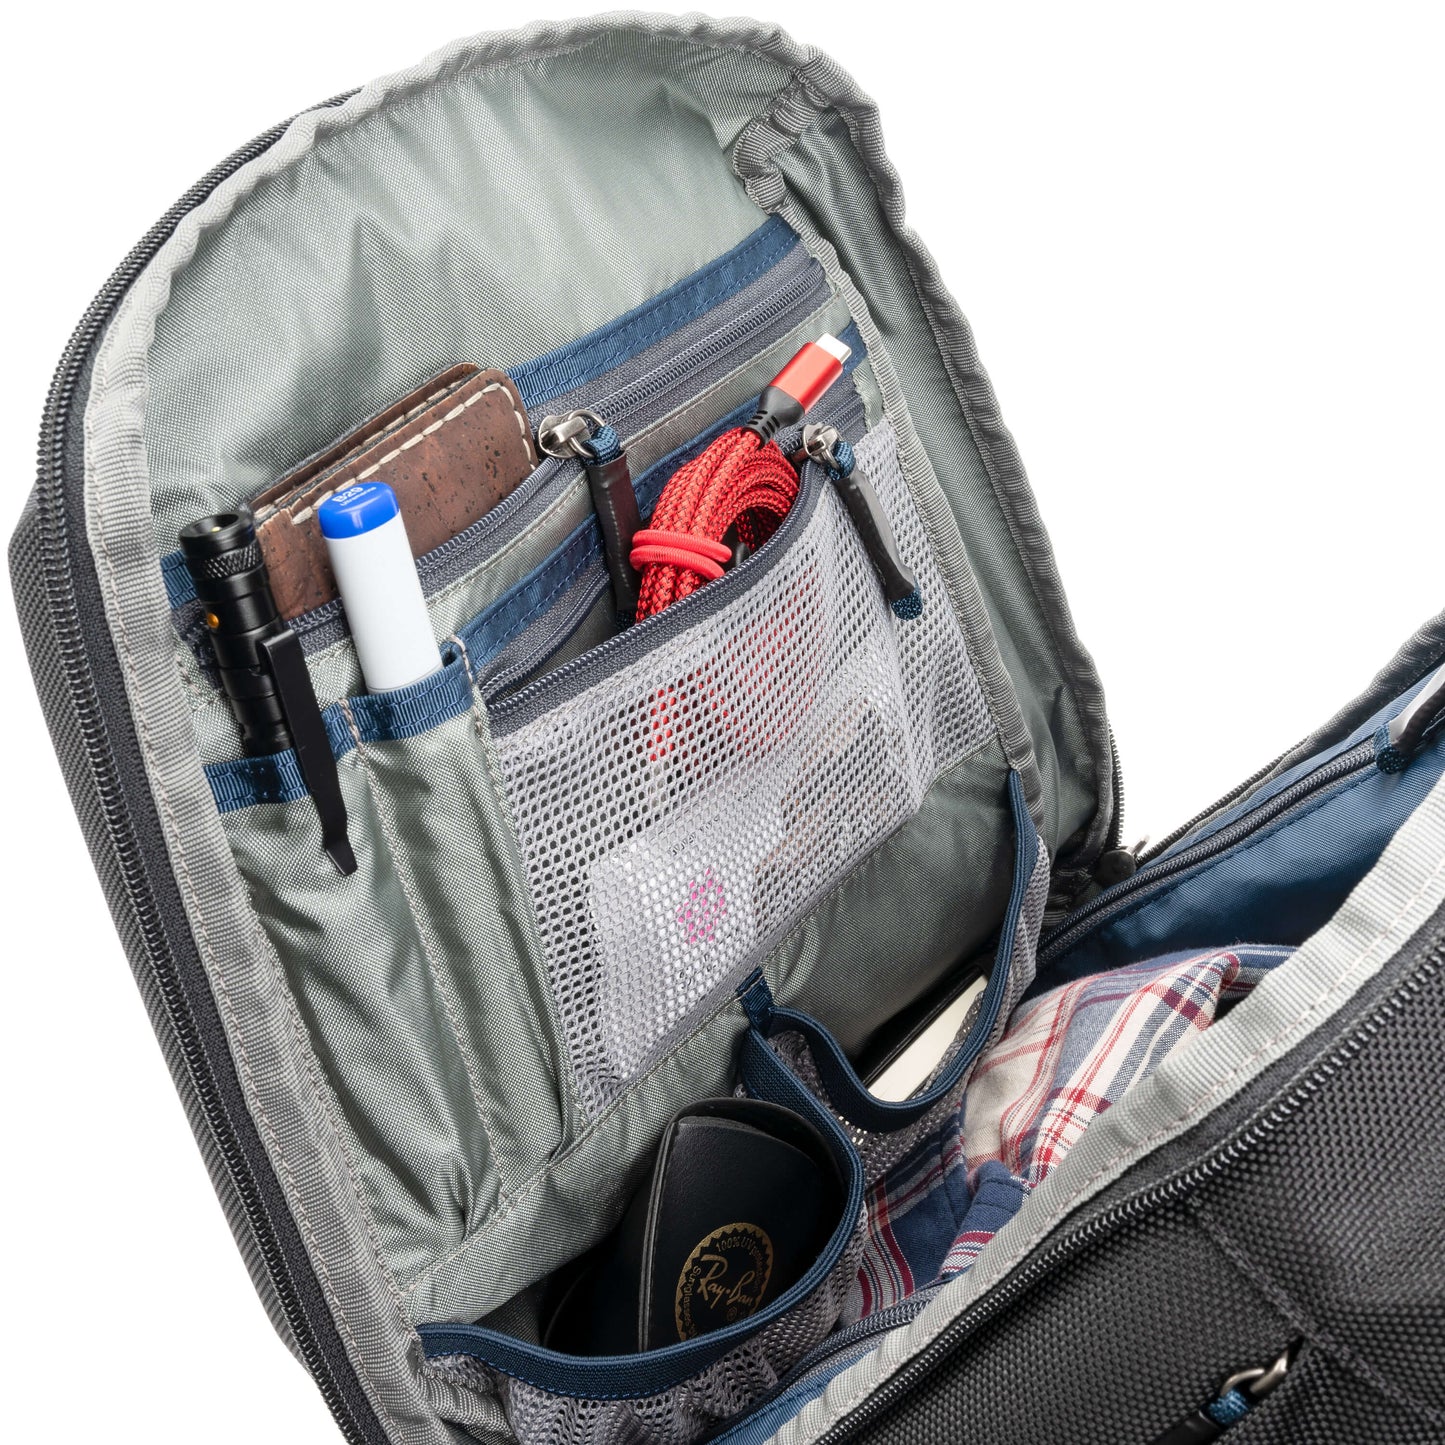 
                  
                    Front compartment organizer with two zippered pockets, one mesh and one fabric and two stretch mesh pockets under the organizer for additional items
                  
                